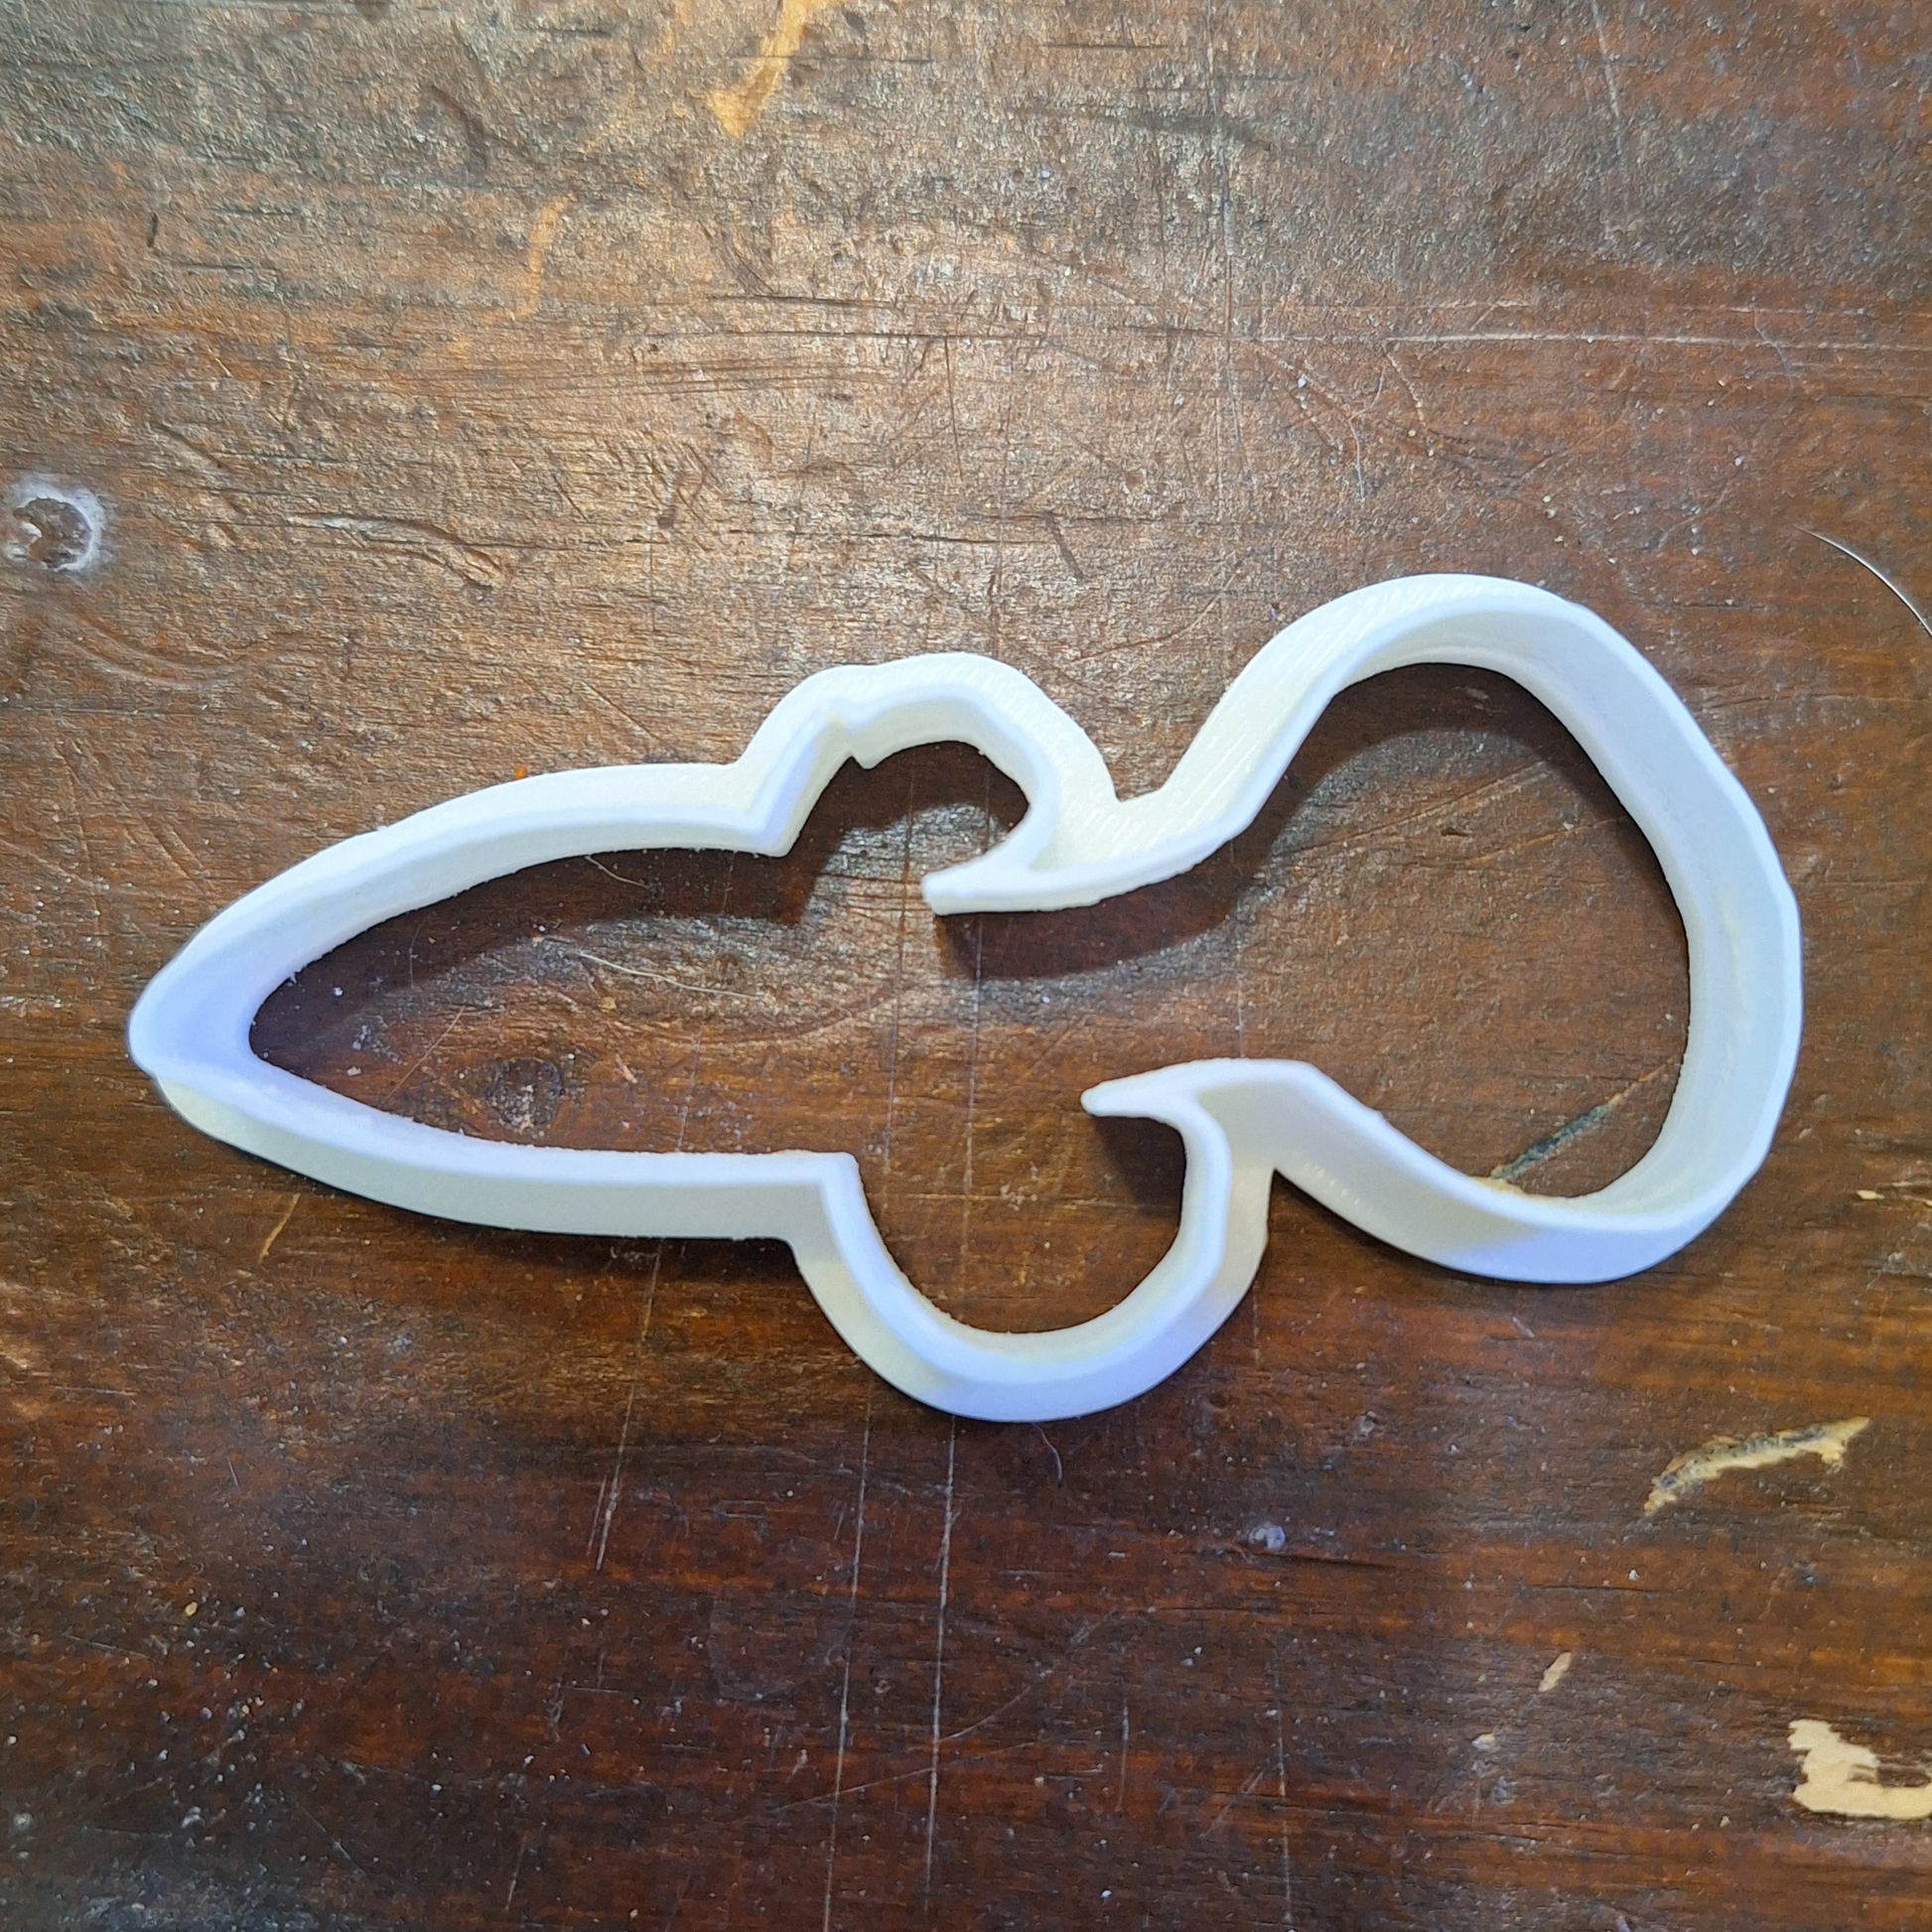 Standard guppy-shaped cookie/clay cutter in Creality White PLA, showcasing a simple and sleek design, against a worn wooden backdrop